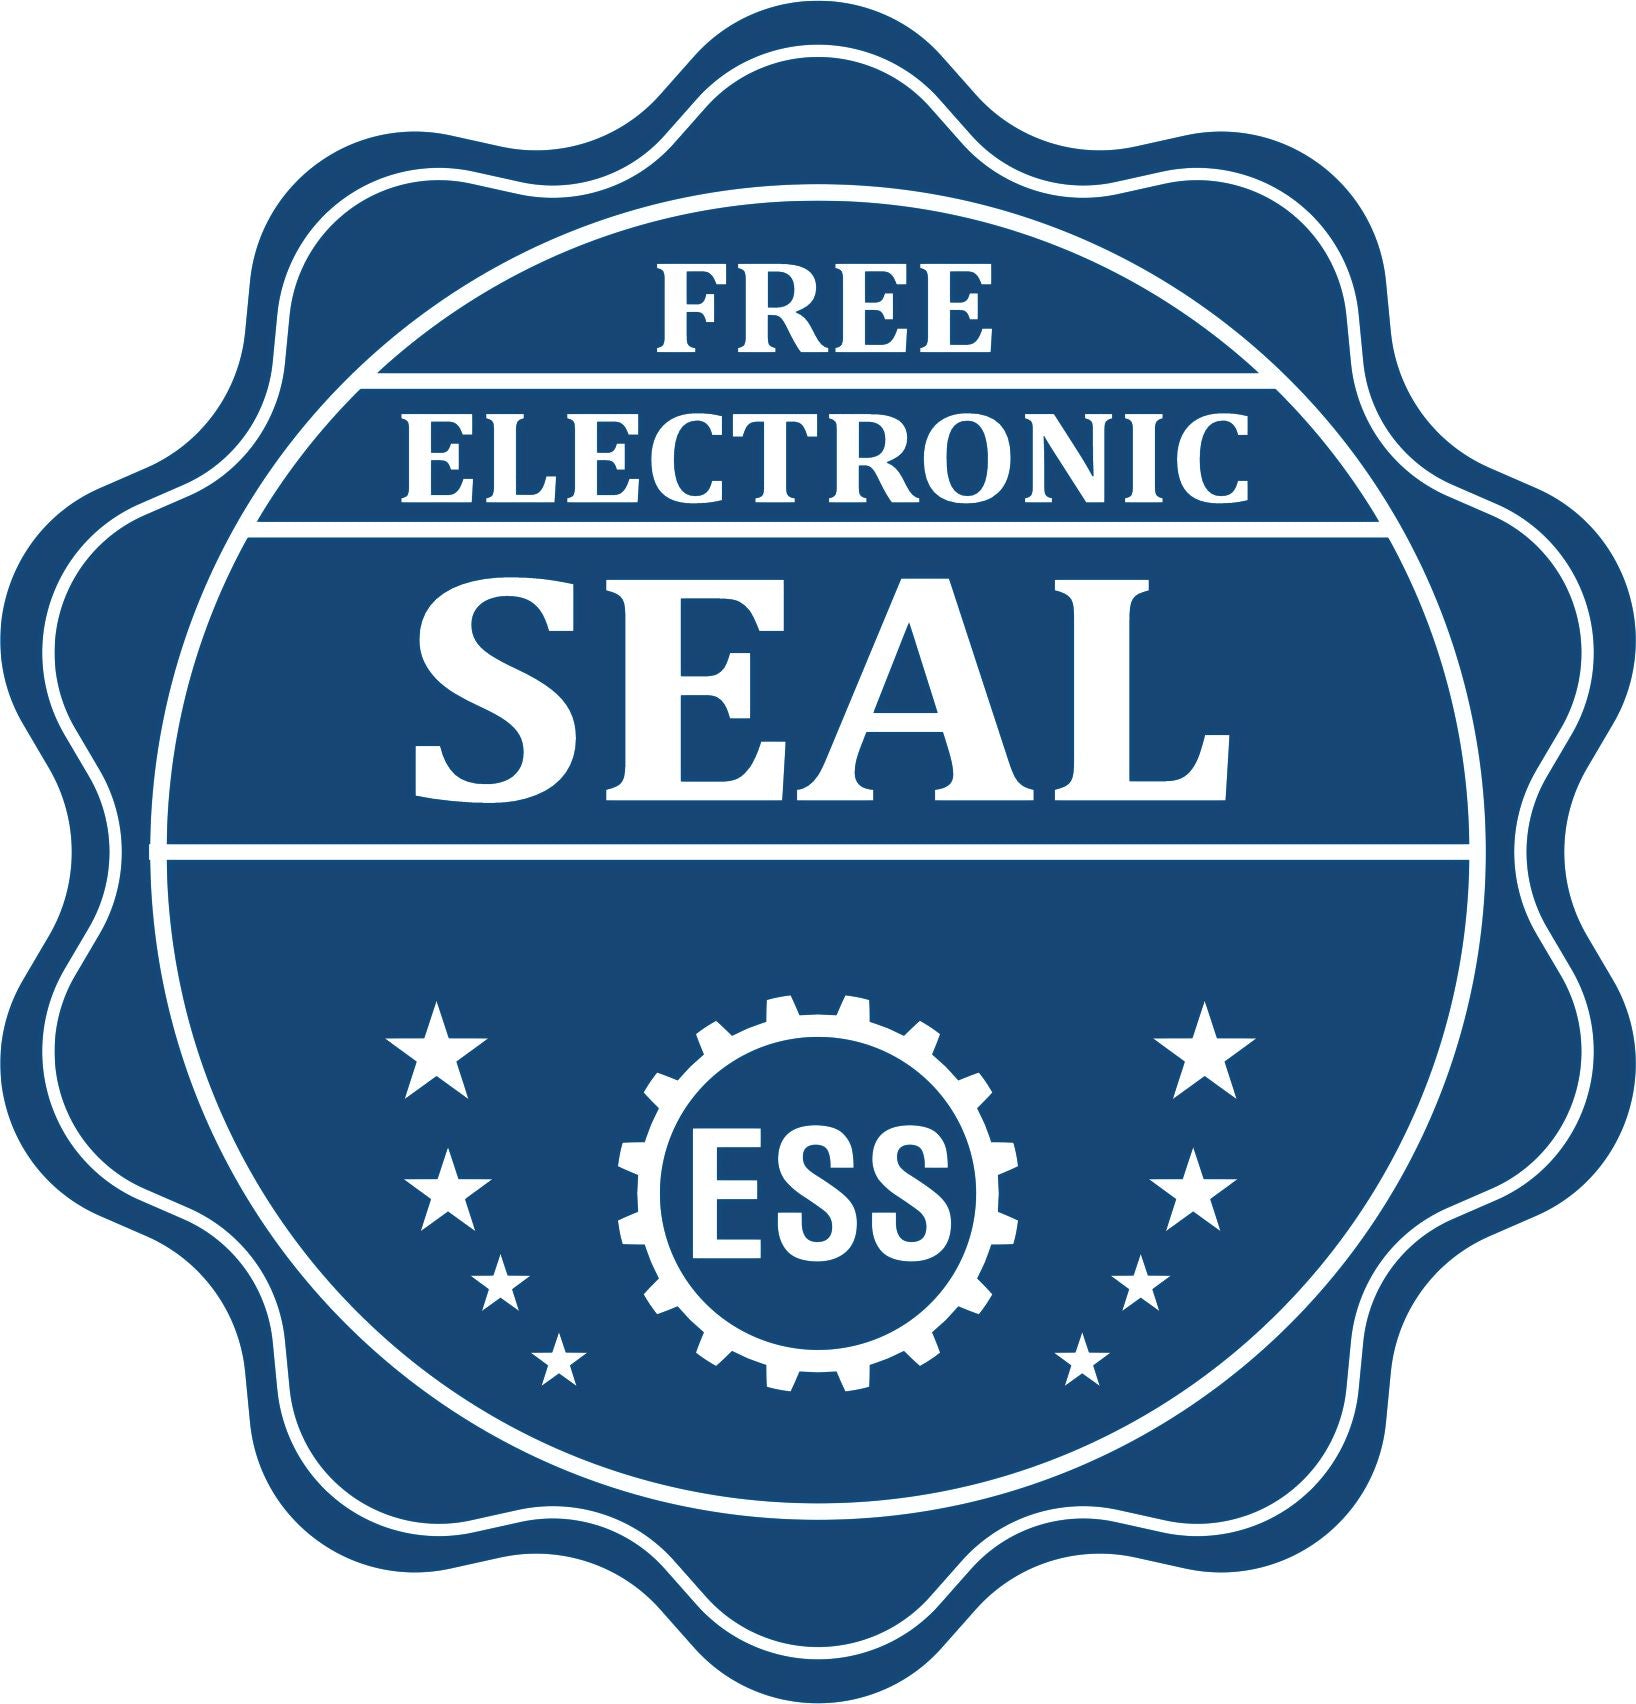 A badge showing a free electronic seal for the Wooden Handle Wyoming Rectangular Notary Public Stamp with stars and the ESS gear on the emblem.